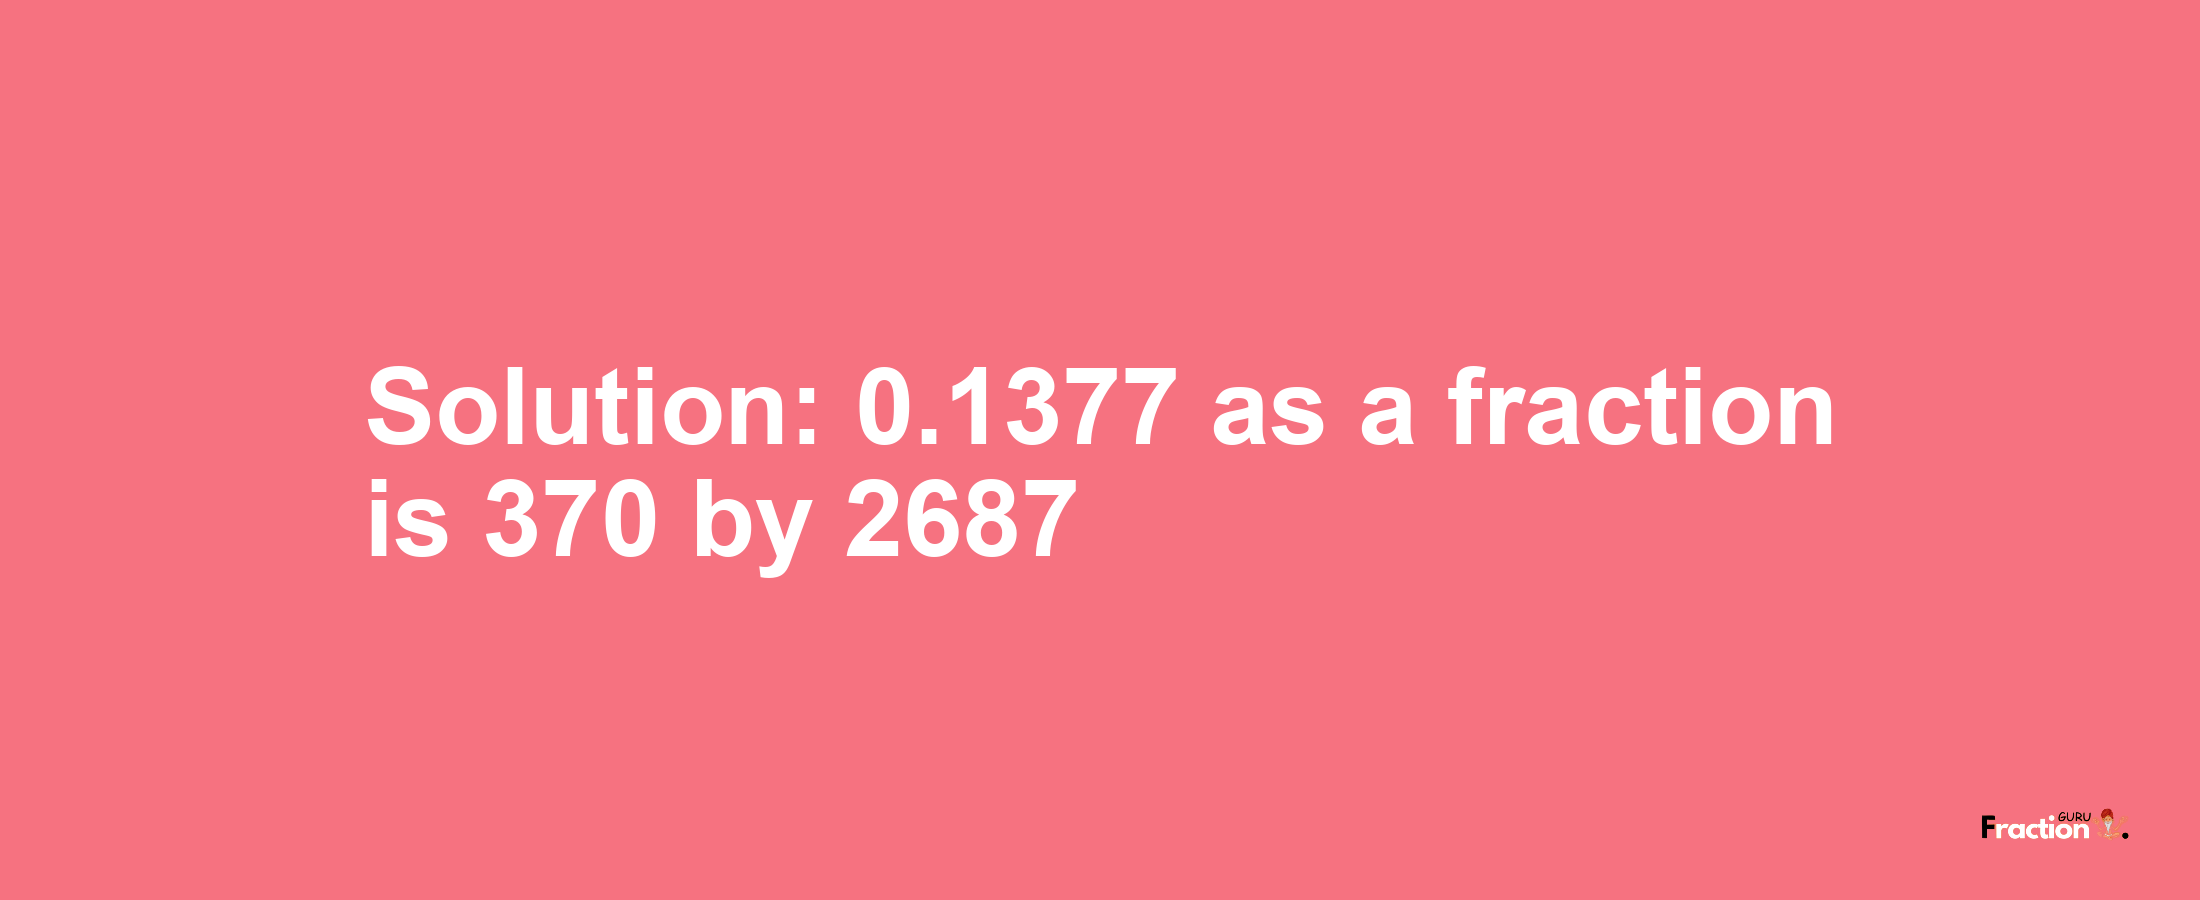 Solution:0.1377 as a fraction is 370/2687